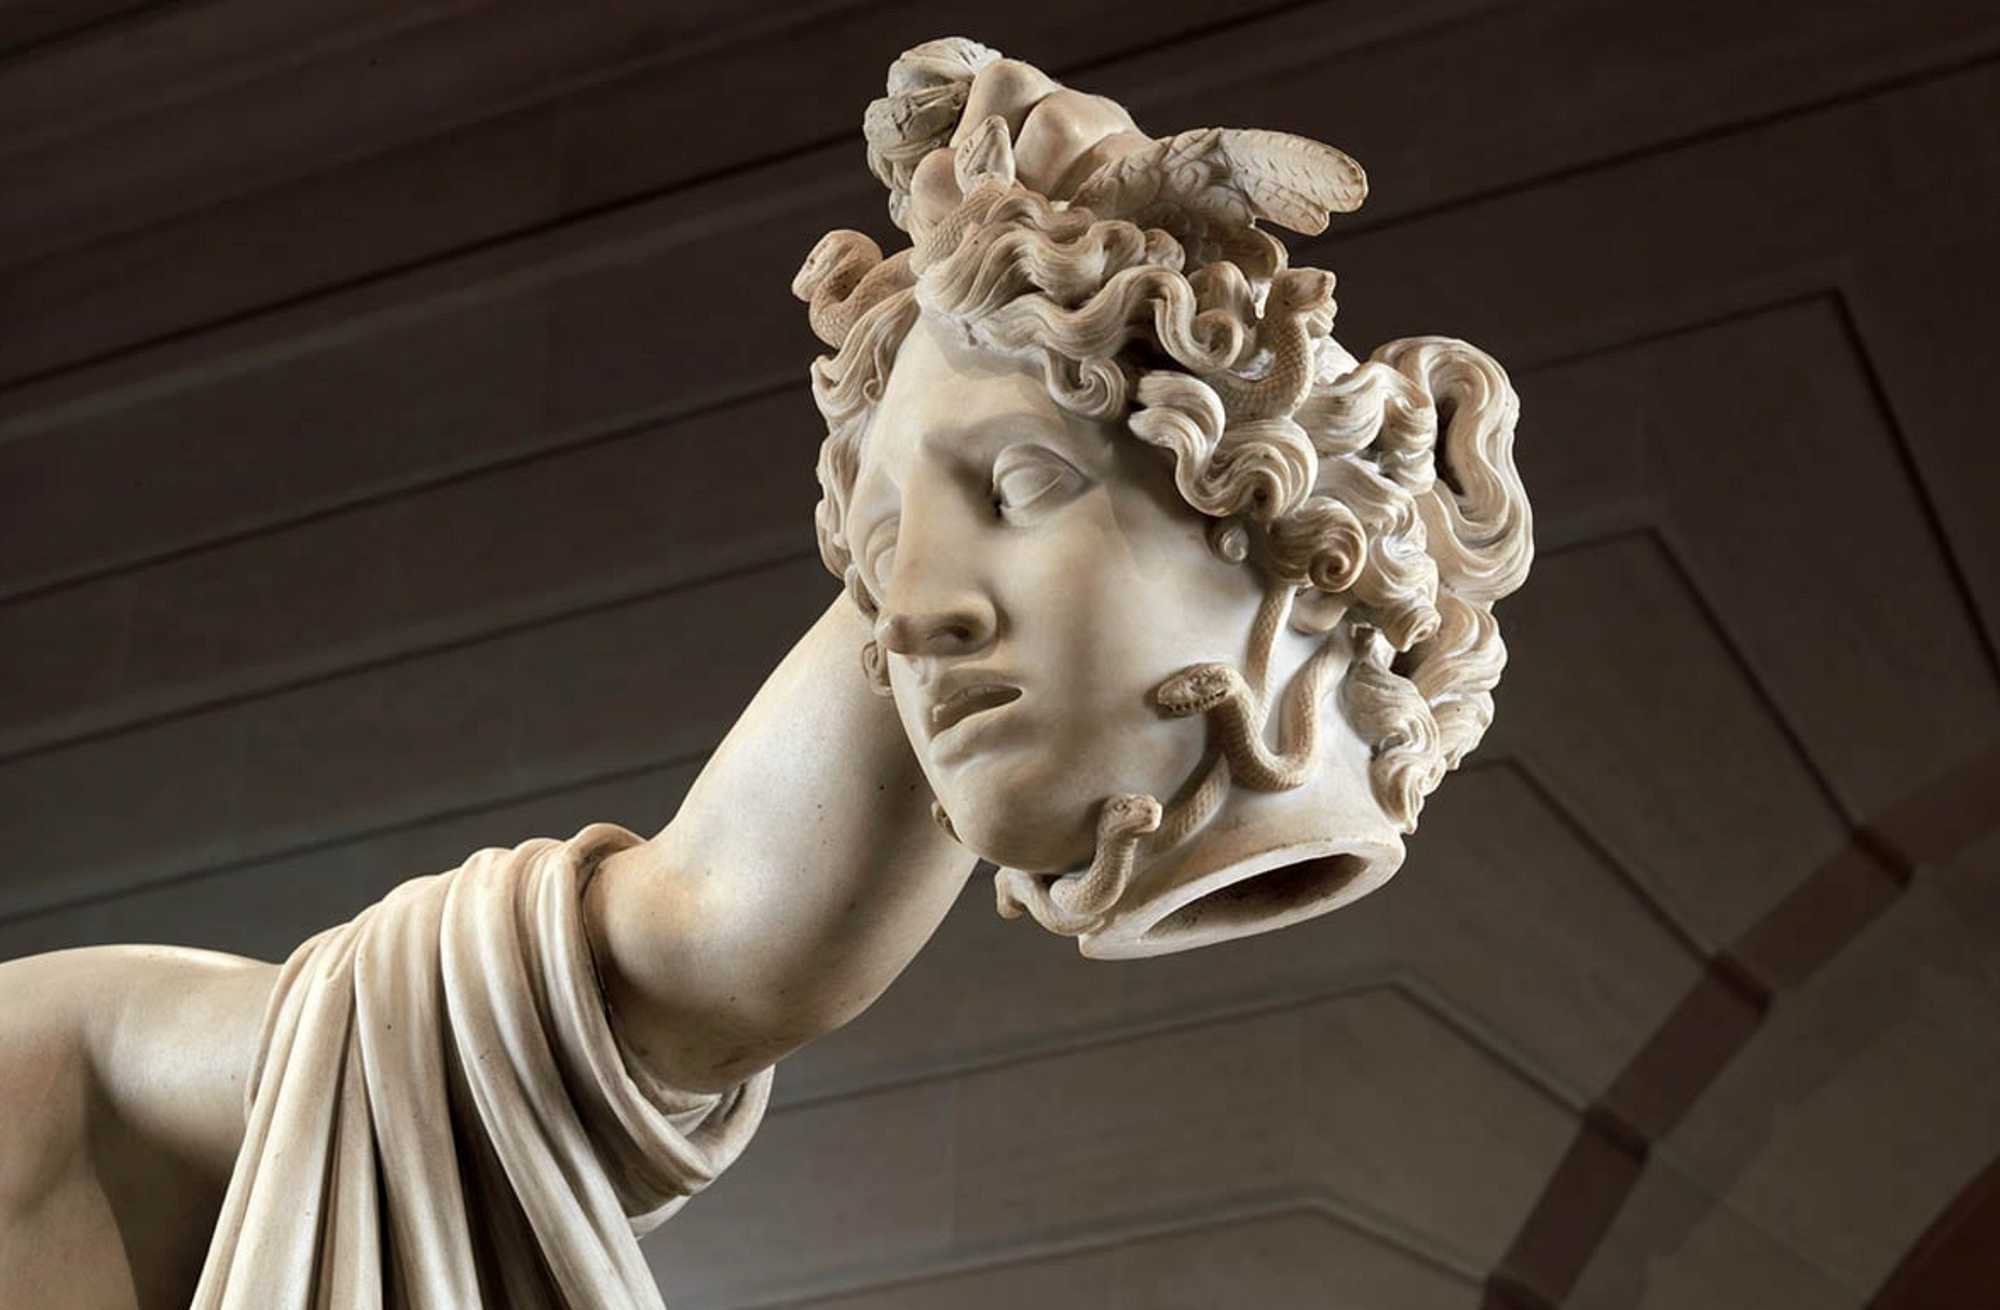 Mishandling the Myth of Medusa. A Feminist Perspective on Medusa | by Tyler  A. Donohue | An Injustice!